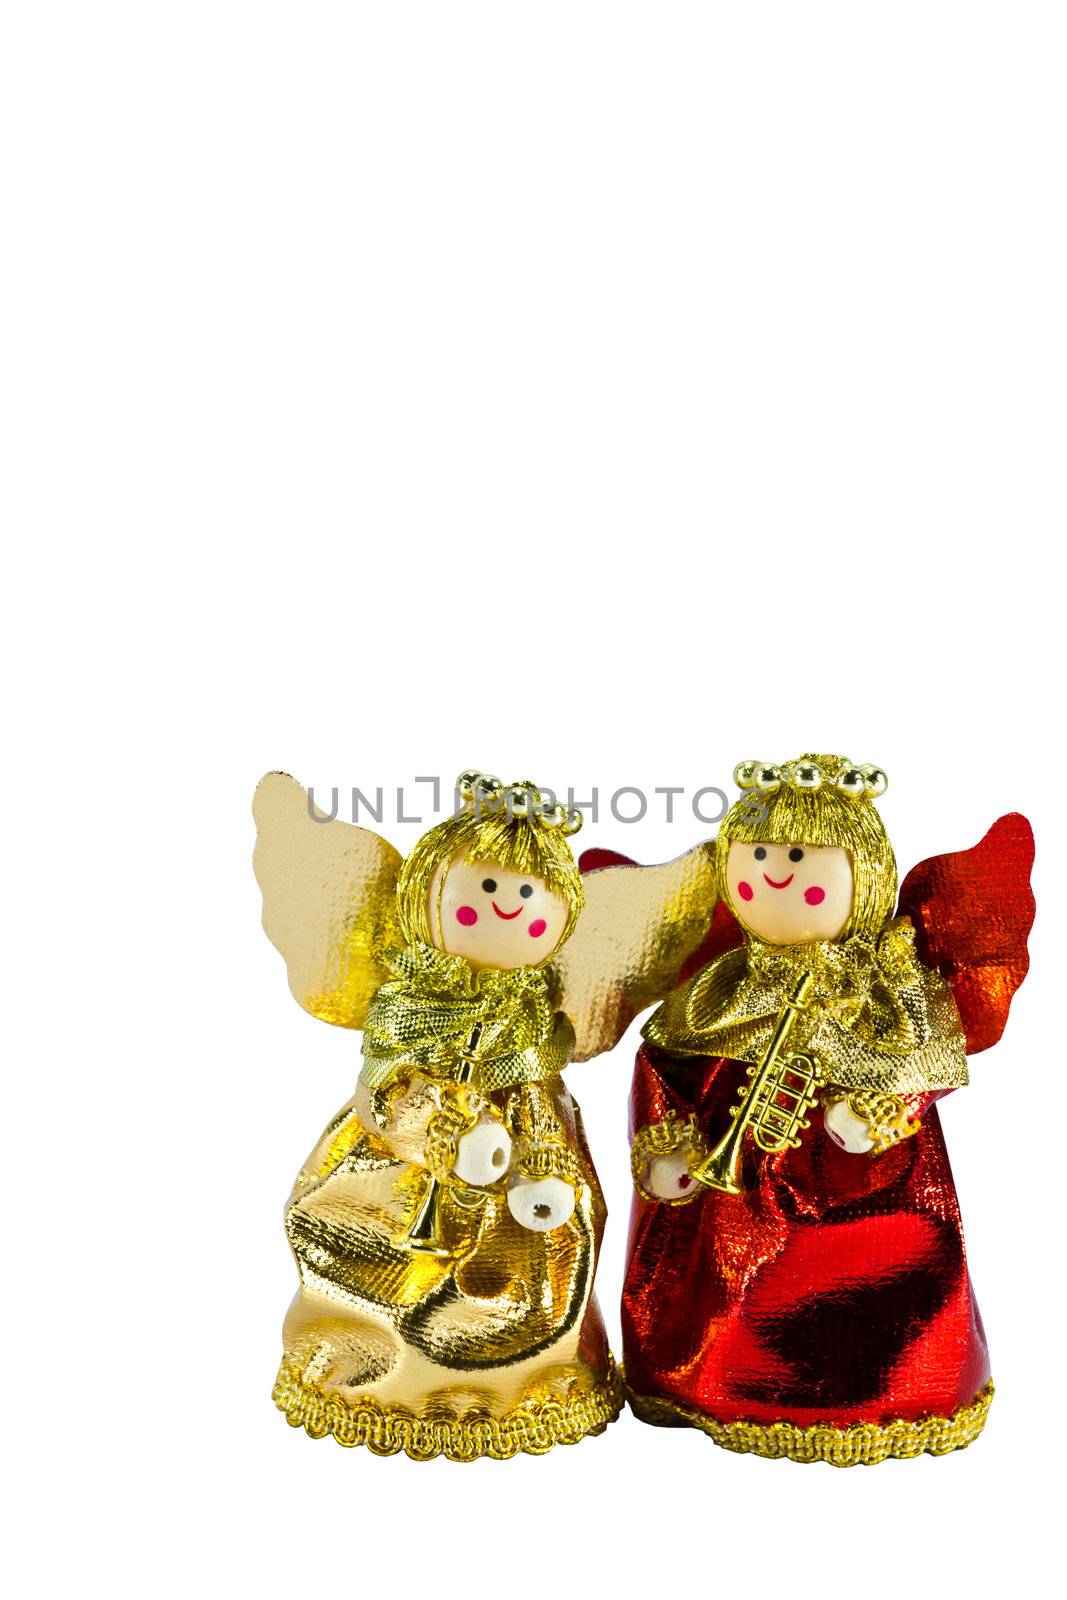 Christmas doll an angel on white background by lavoview